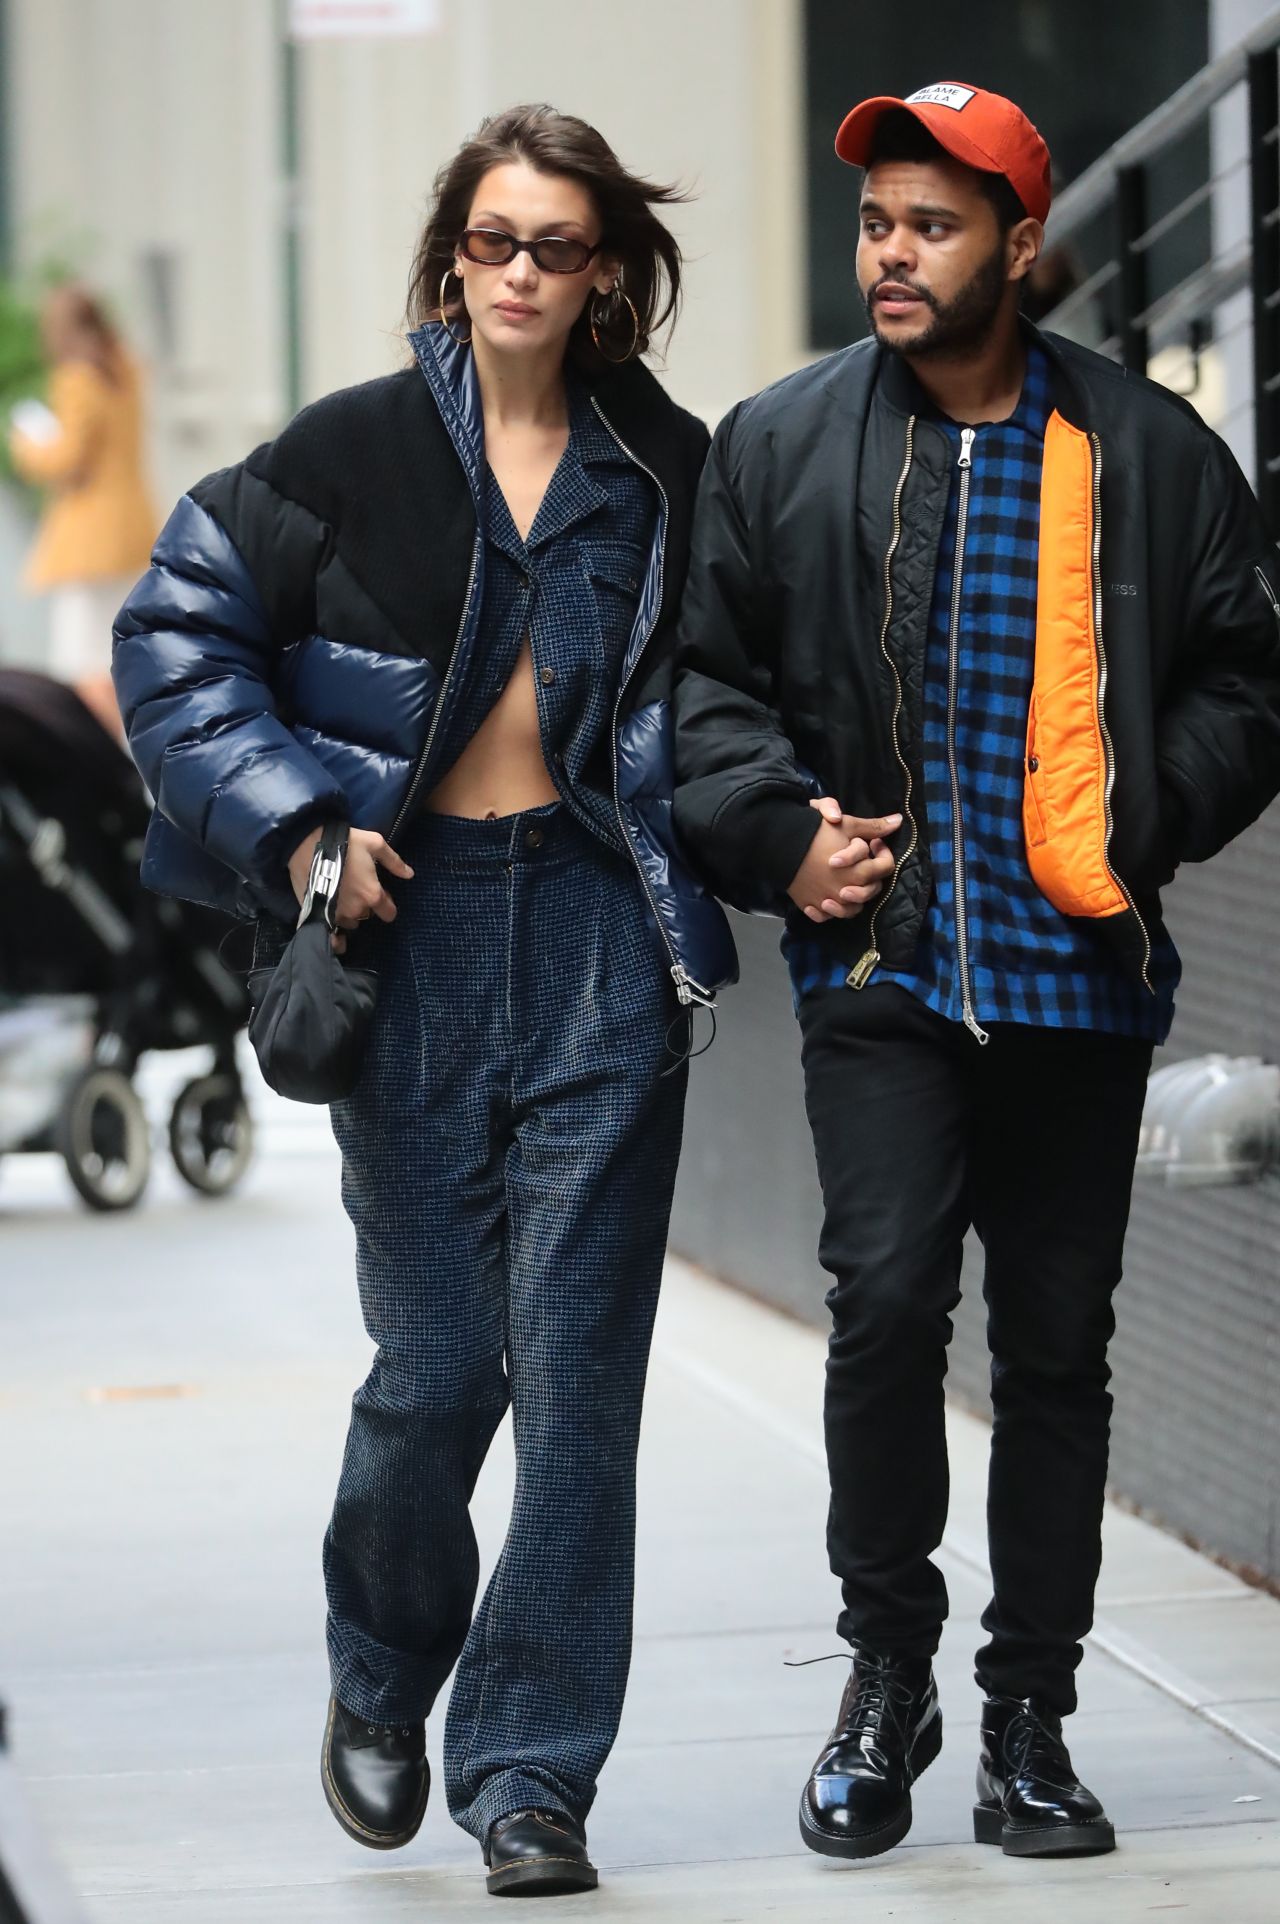 bella-hadid-and-the-weeknd-out-in-new-york-city-10-29-2018-8.jpg